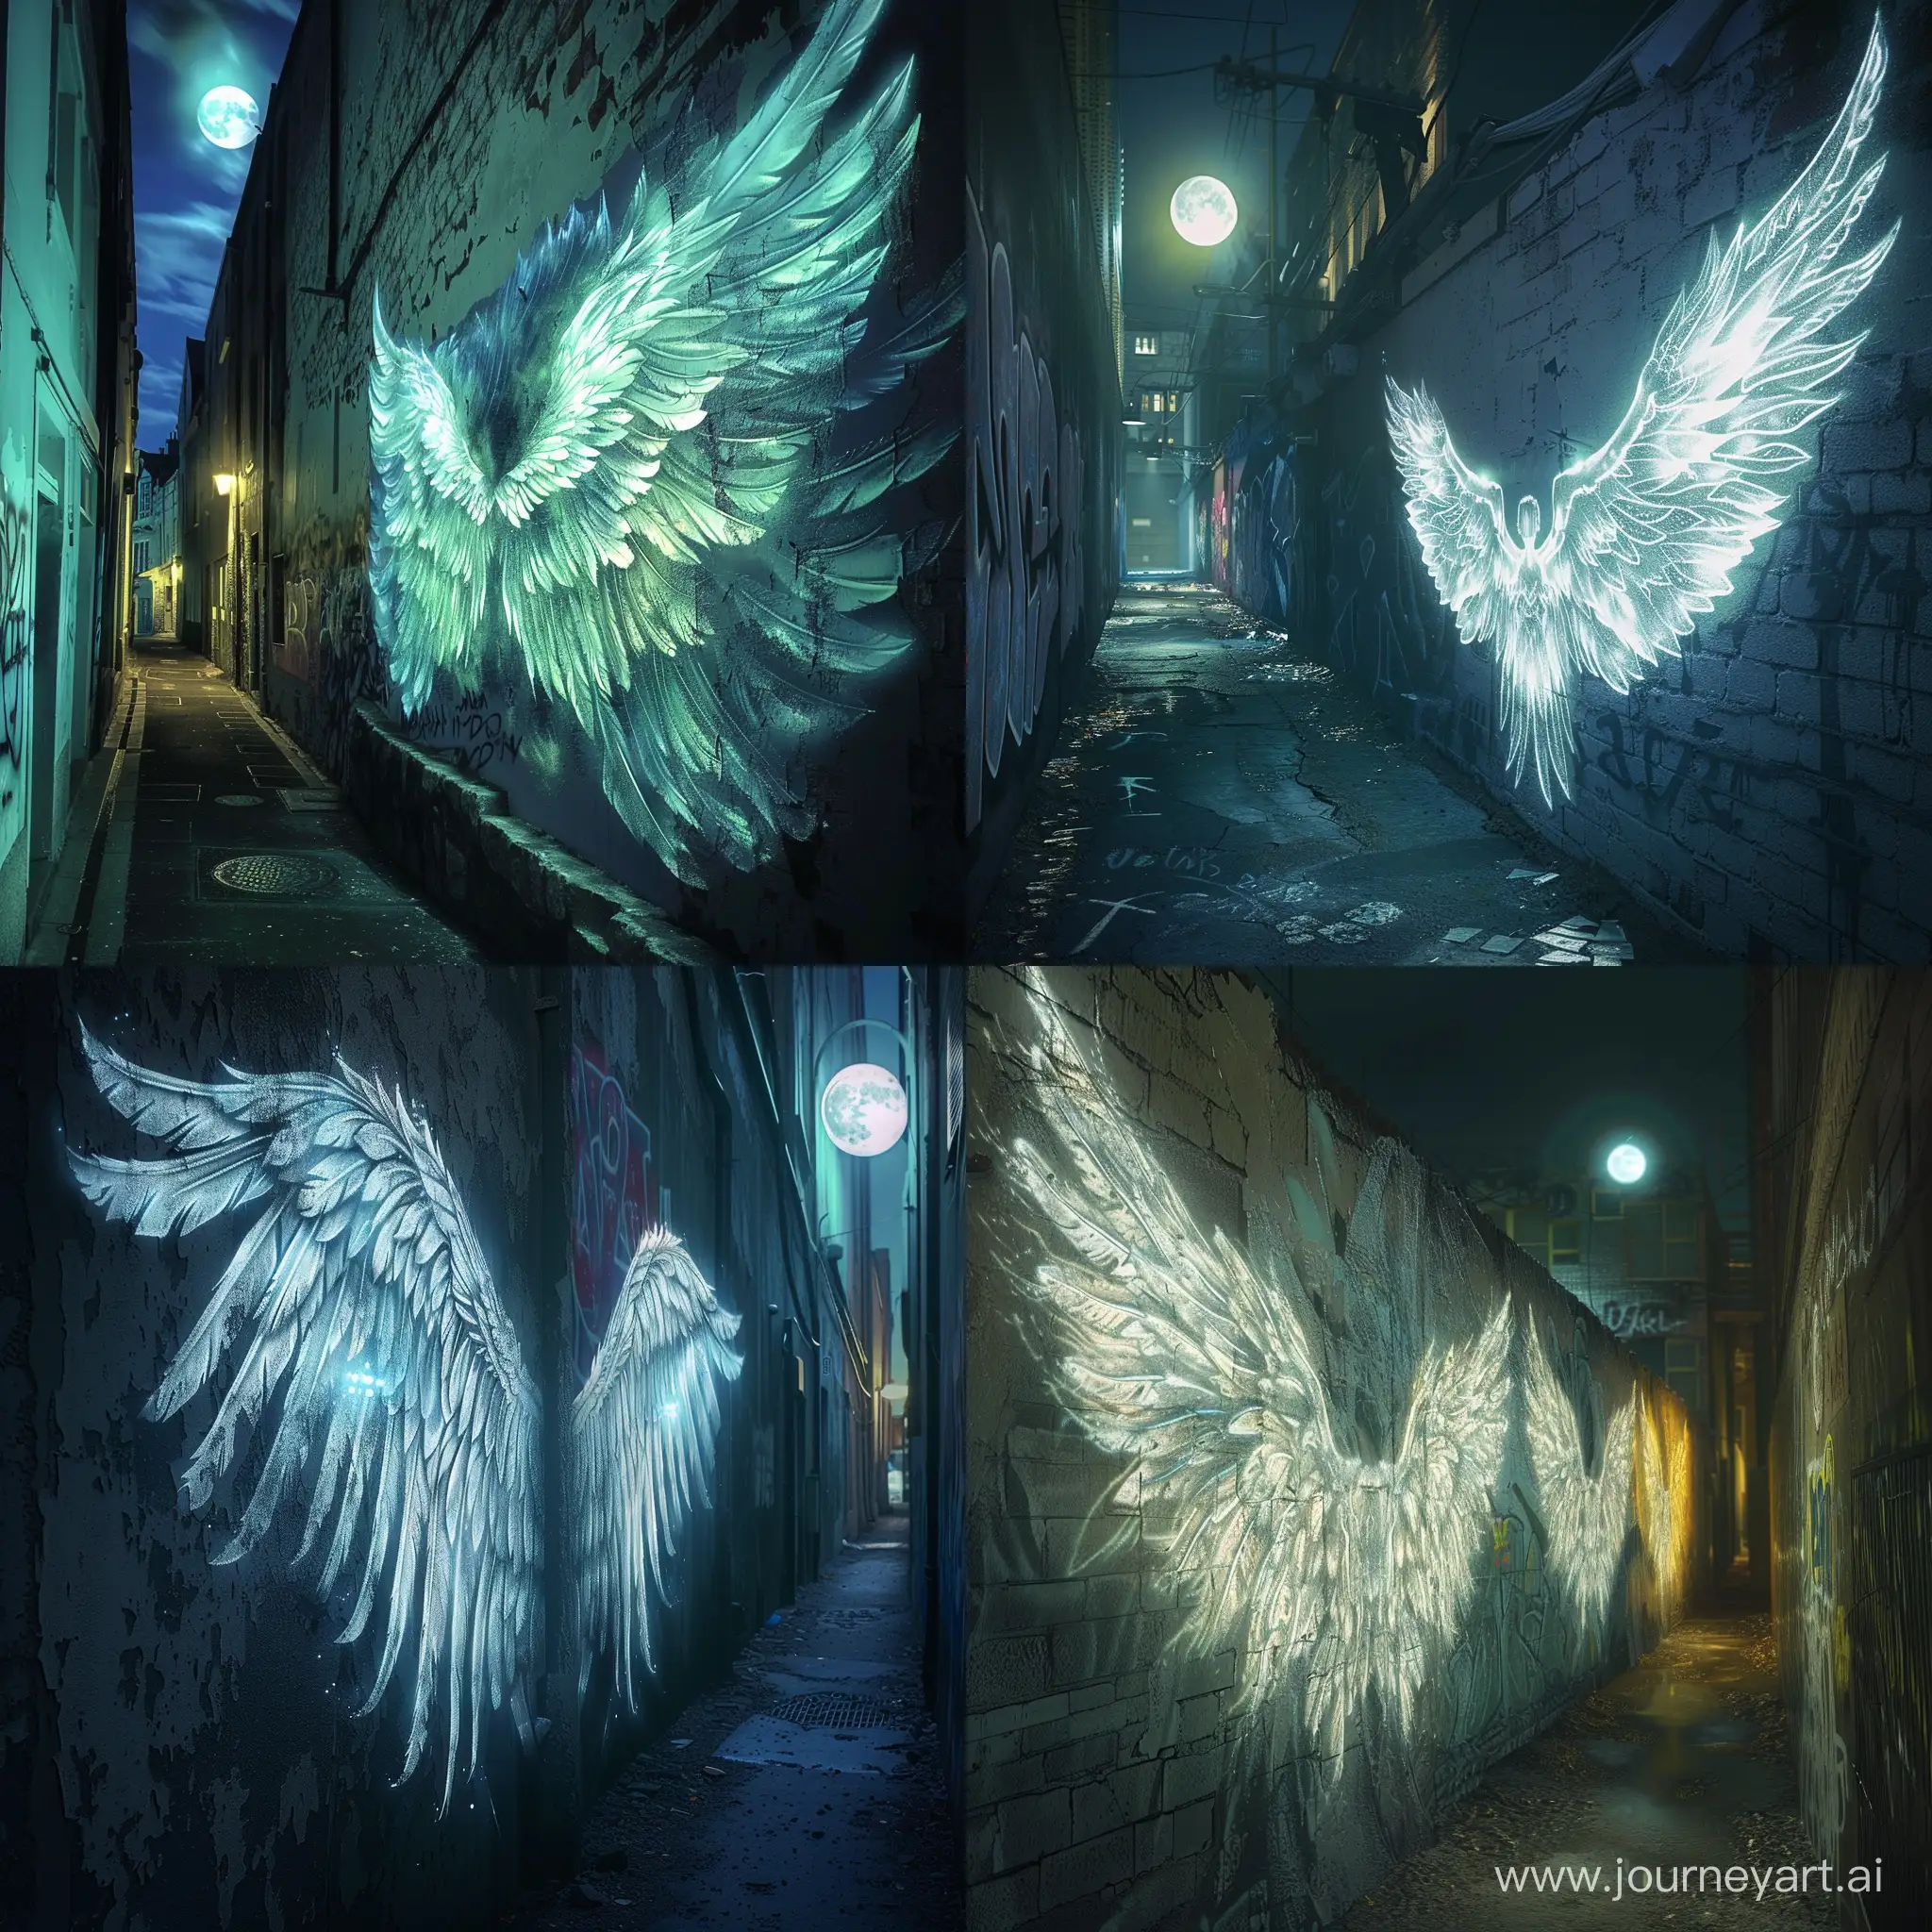 Create an image of a dark, narrow alley at night, illuminated by the light of a full moon. The alley is bordered by a long wall that features a luminous mural of angelic wings, painted to appear as if glowing in the moonlight. The wings are detailed and cast subtle shadows on the wall's textured surface. The environment is still and mystical, with the moon adding a serene light to the scene.
Exclude any living creatures, people, or moving elements like cars and animals. There should be no graffiti or other murals on the wall apart from the wings. Avoid bright artificial lights such as street lamps or neon signs that could distract from the moonlit atmosphere of the alley.